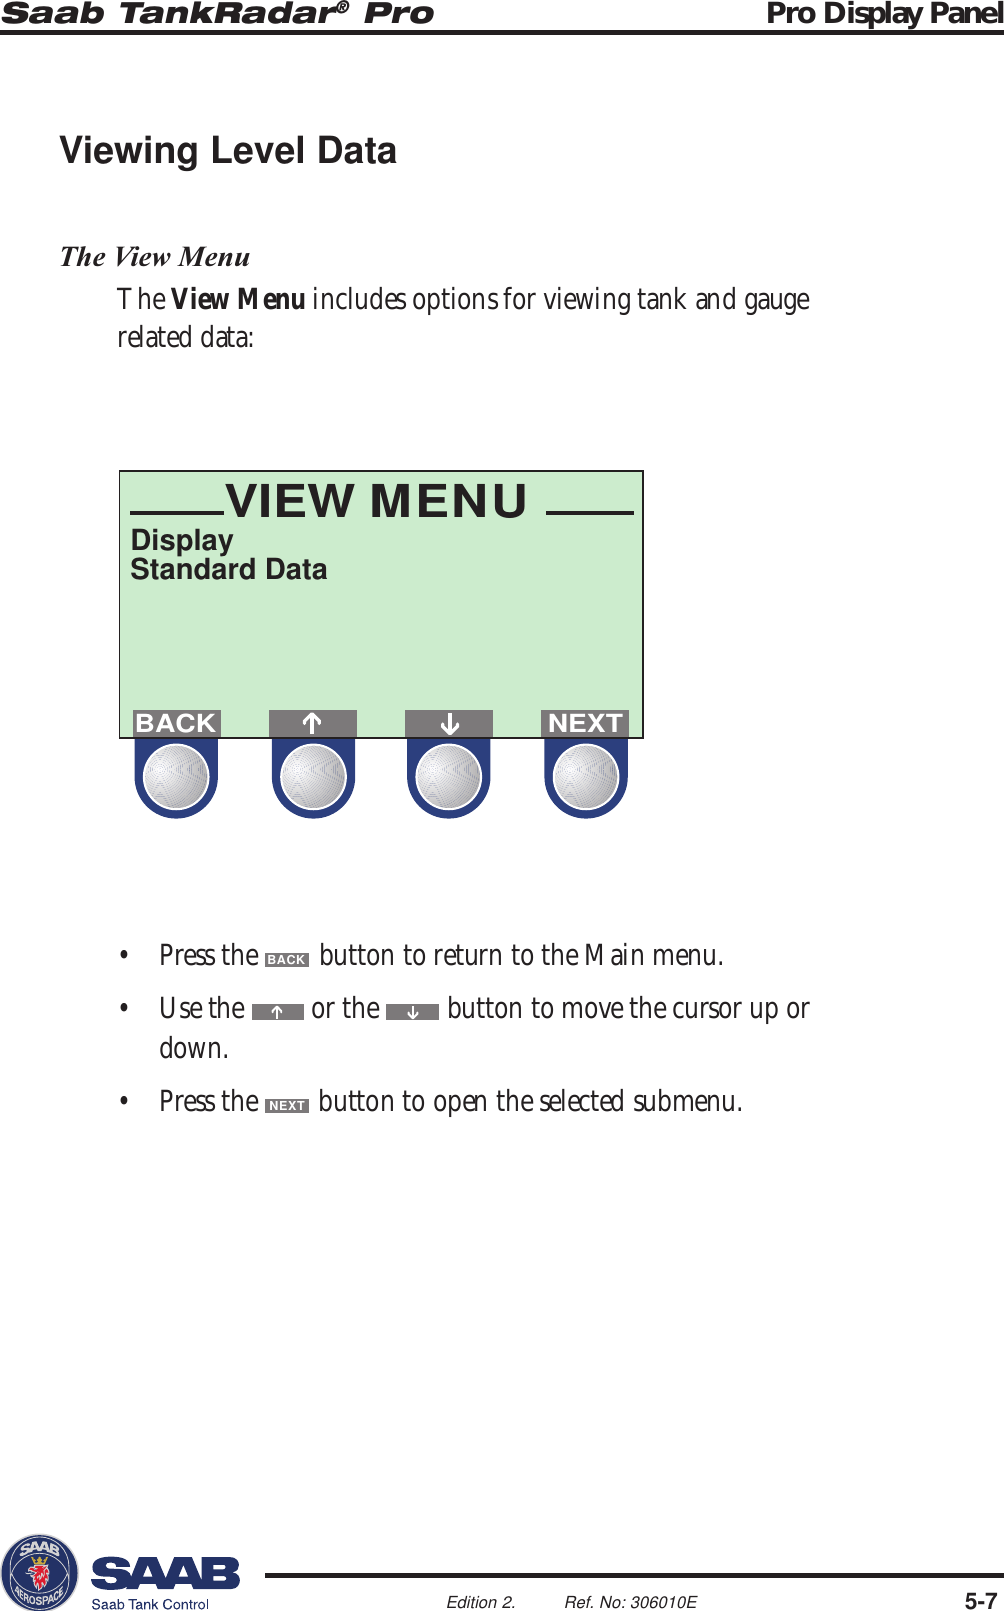 Saab TankRadar® Pro Pro Display Panel5-7Edition 2. Ref. No: 306010EVIEW MENUDisplayStandard DataNEXTBACKViewing Level DataThe View MenuThe View Menu includes options for viewing tank and gaugerelated data:• Press the BACK button to return to the Main menu.• Use the   or the   button to move the cursor up ordown.• Press the NEXT button to open the selected submenu.